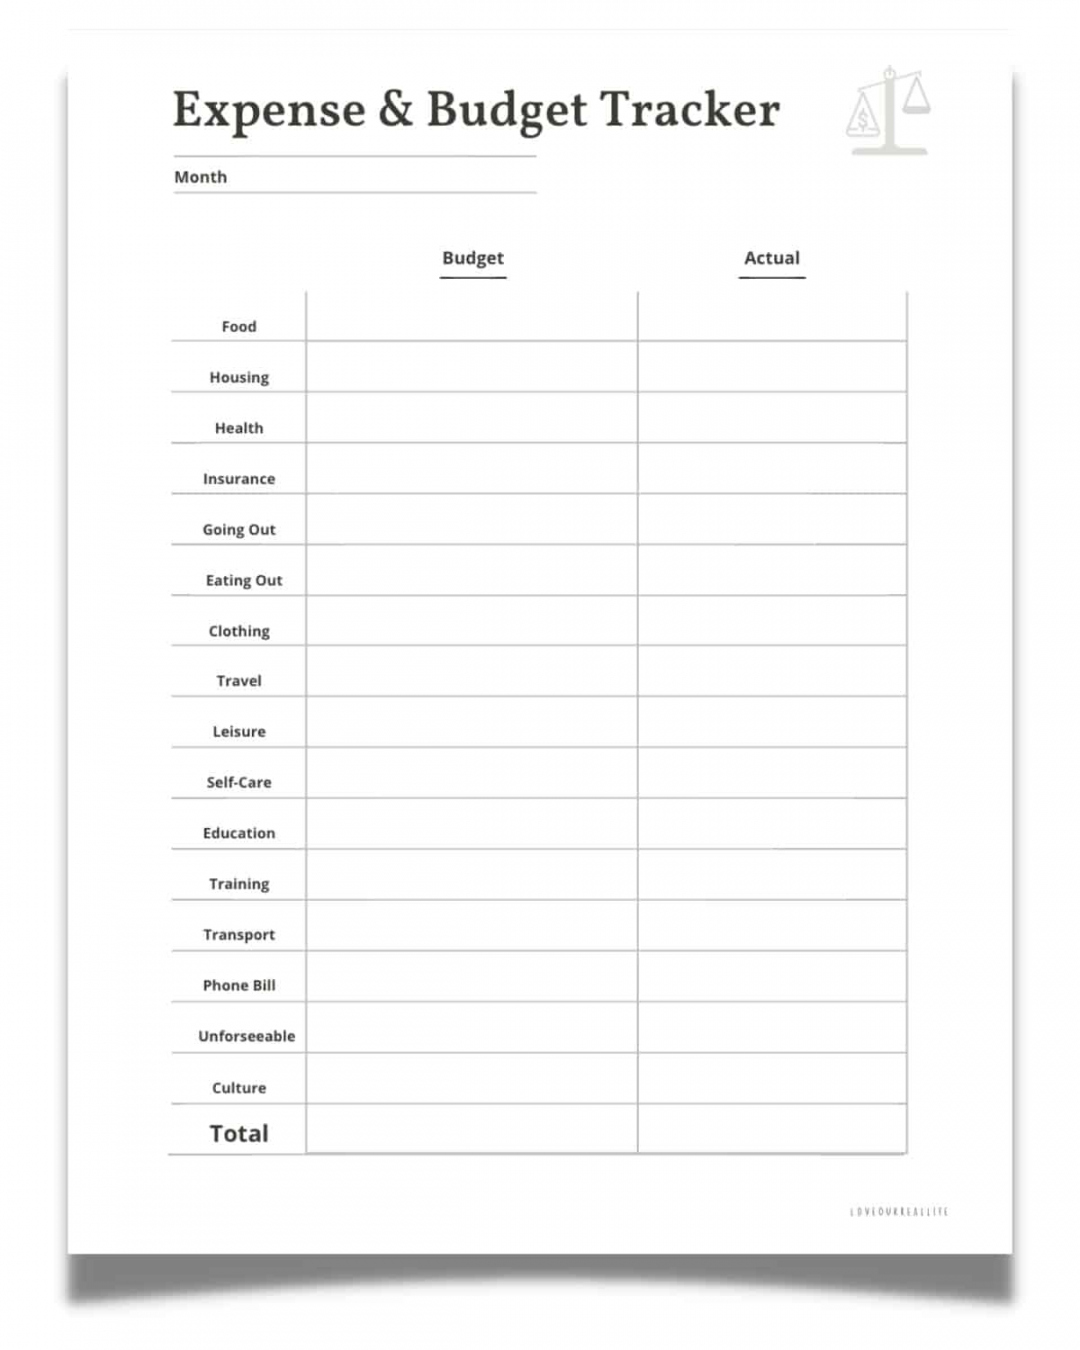 FREE Printable Expense Tracker - Monthly Budget Trackers ⋆ Love  - FREE Printables - Expense Tracker Printable Free